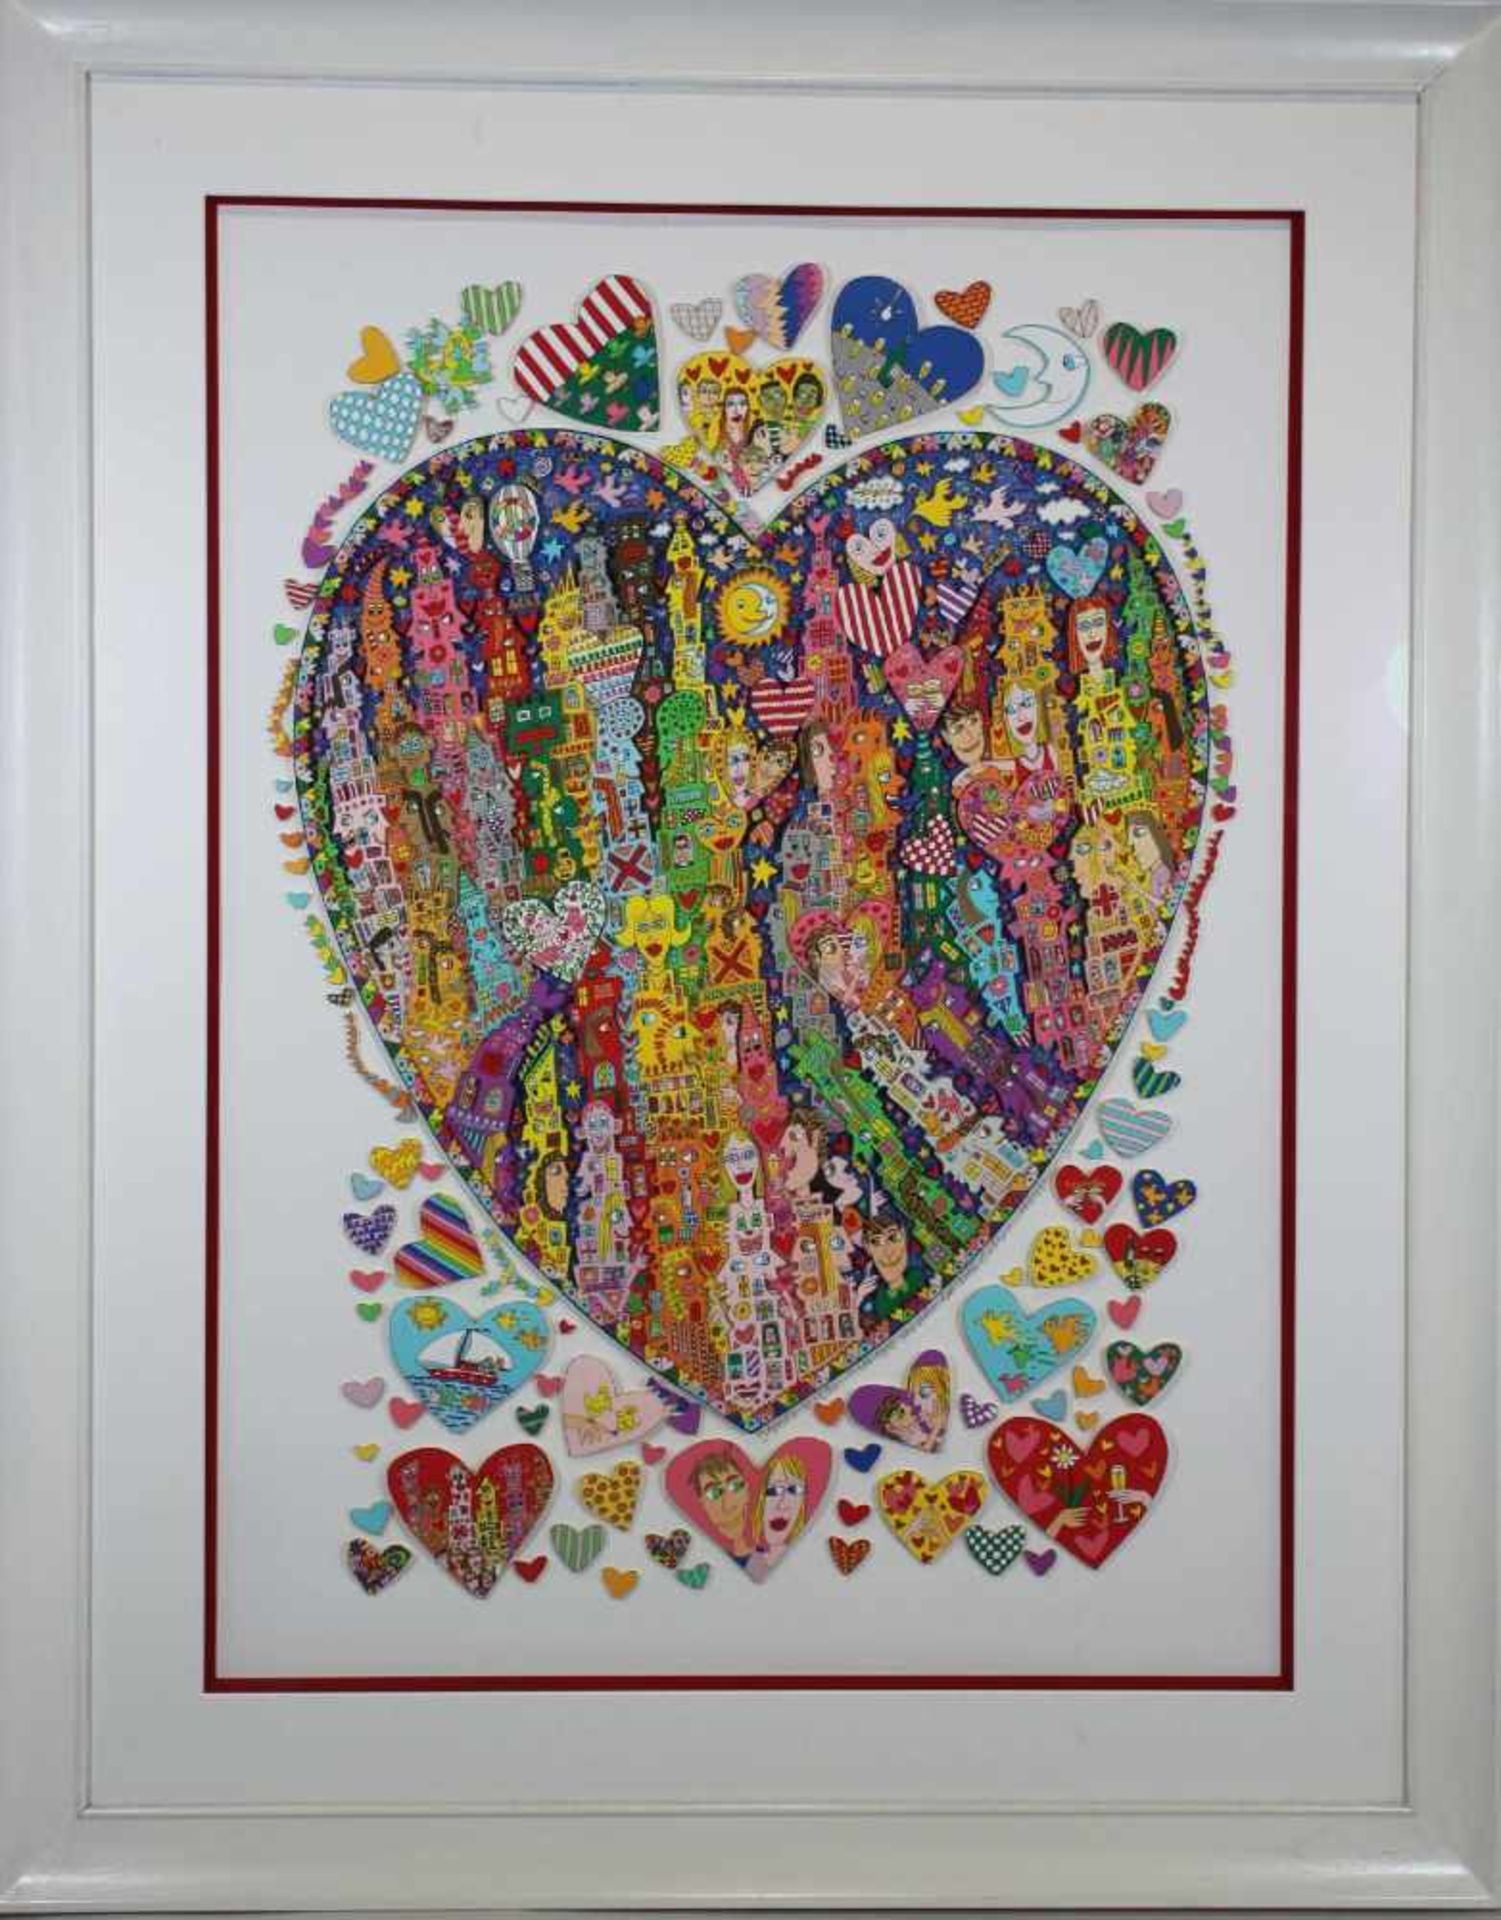 James Rizzi (1950 - 2011), In the heart of the city, 2001, 3-D Lithografie in Farbe, mit Bl. - Image 2 of 3